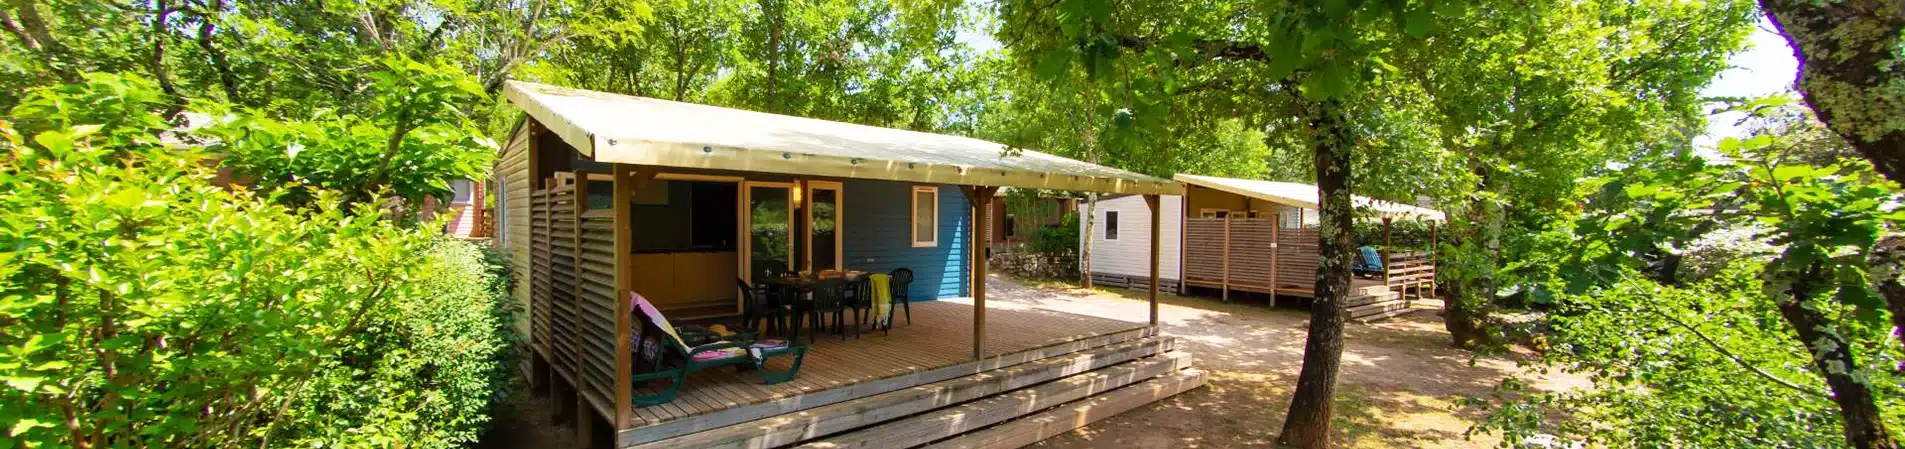 header Mobile Home rental camping in ardeche